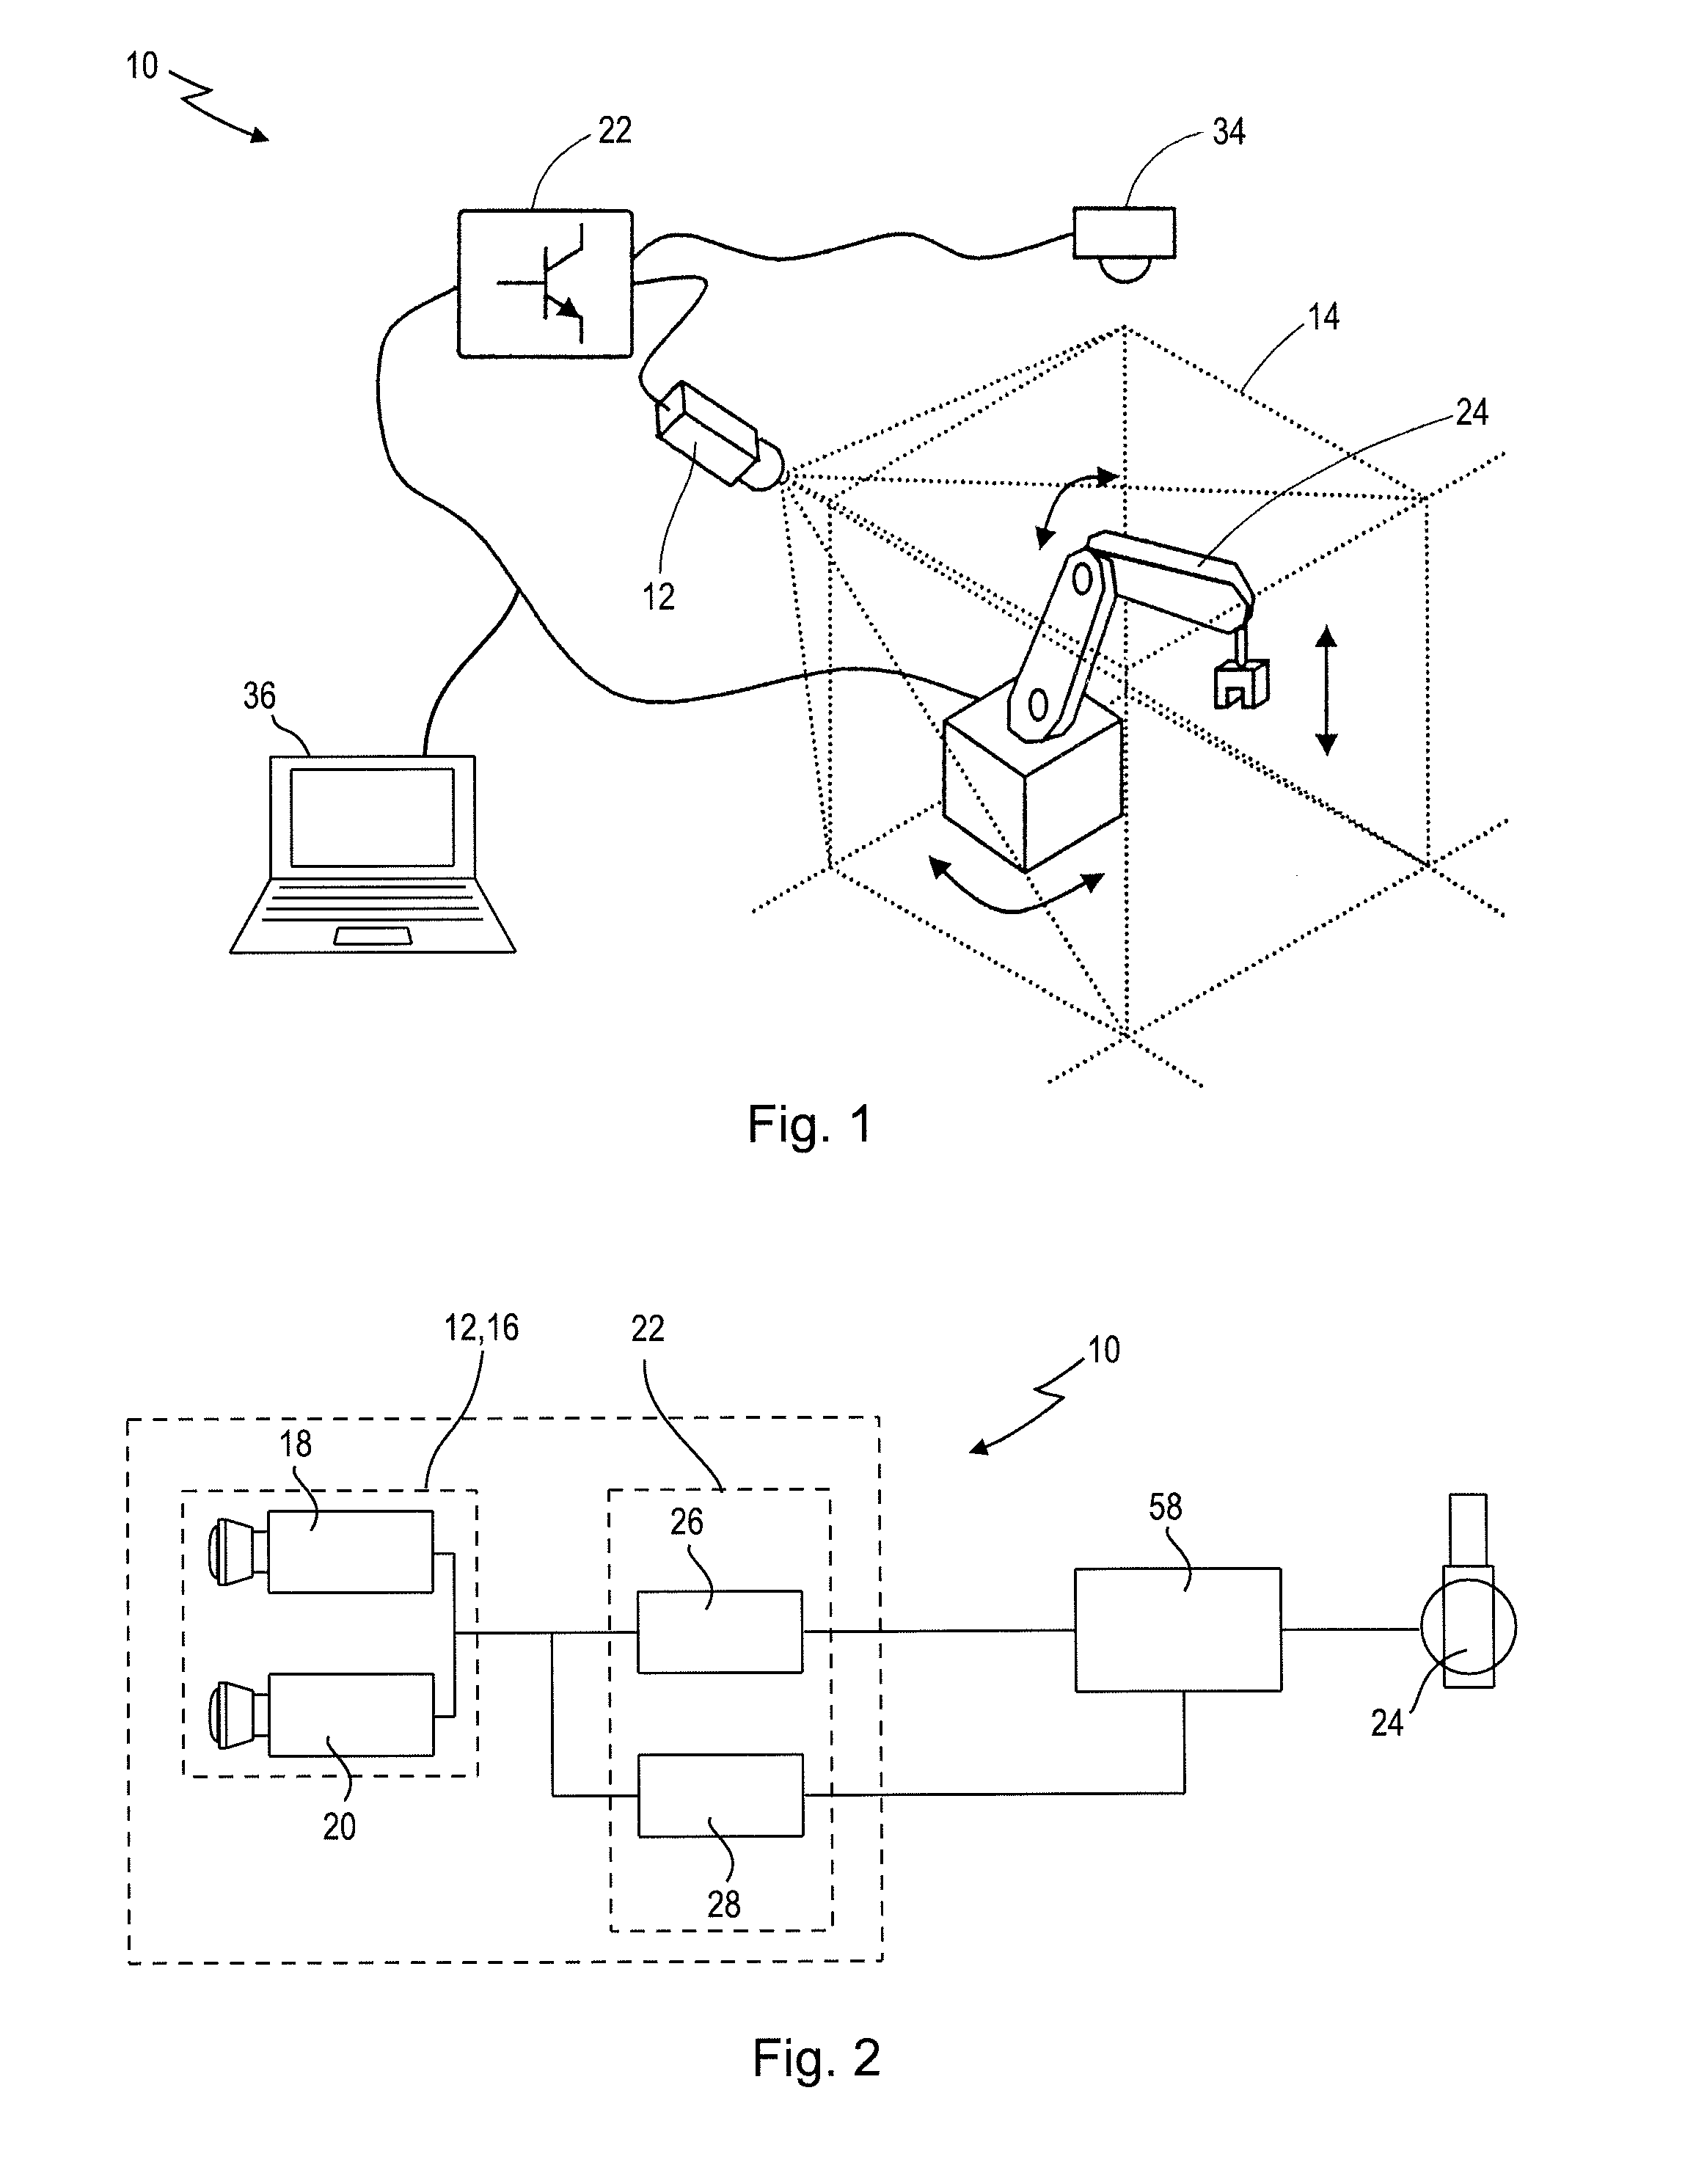 Apparatus and method for safeguarding an automatically operating machine